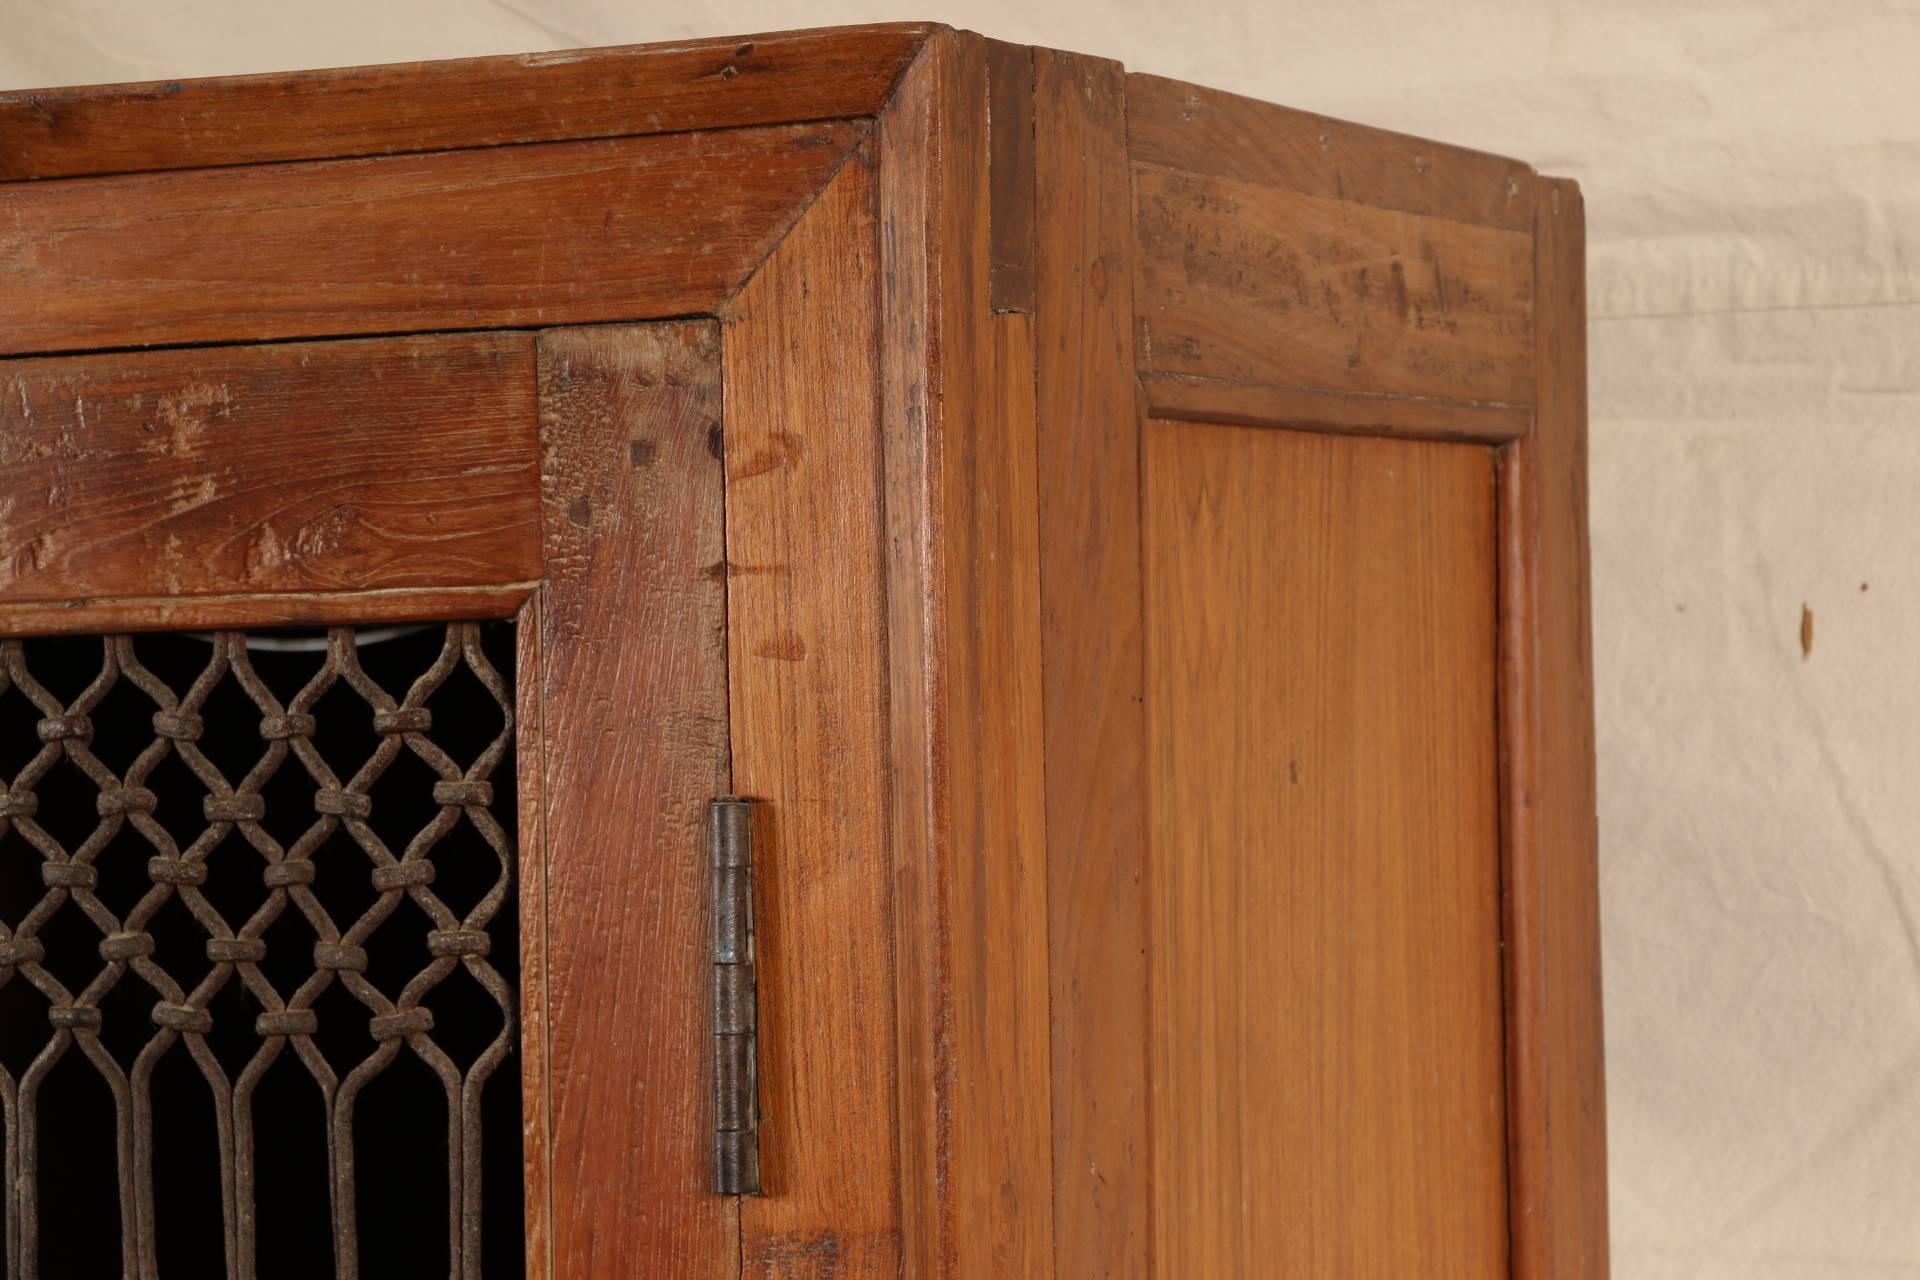 Wood storage cabinet with three shelves and tripartite sectioned door with iron grille work. A shaped apron all around, dowel construction.
Condition: very good with rust patina to the grilles, worn finish to the apron.